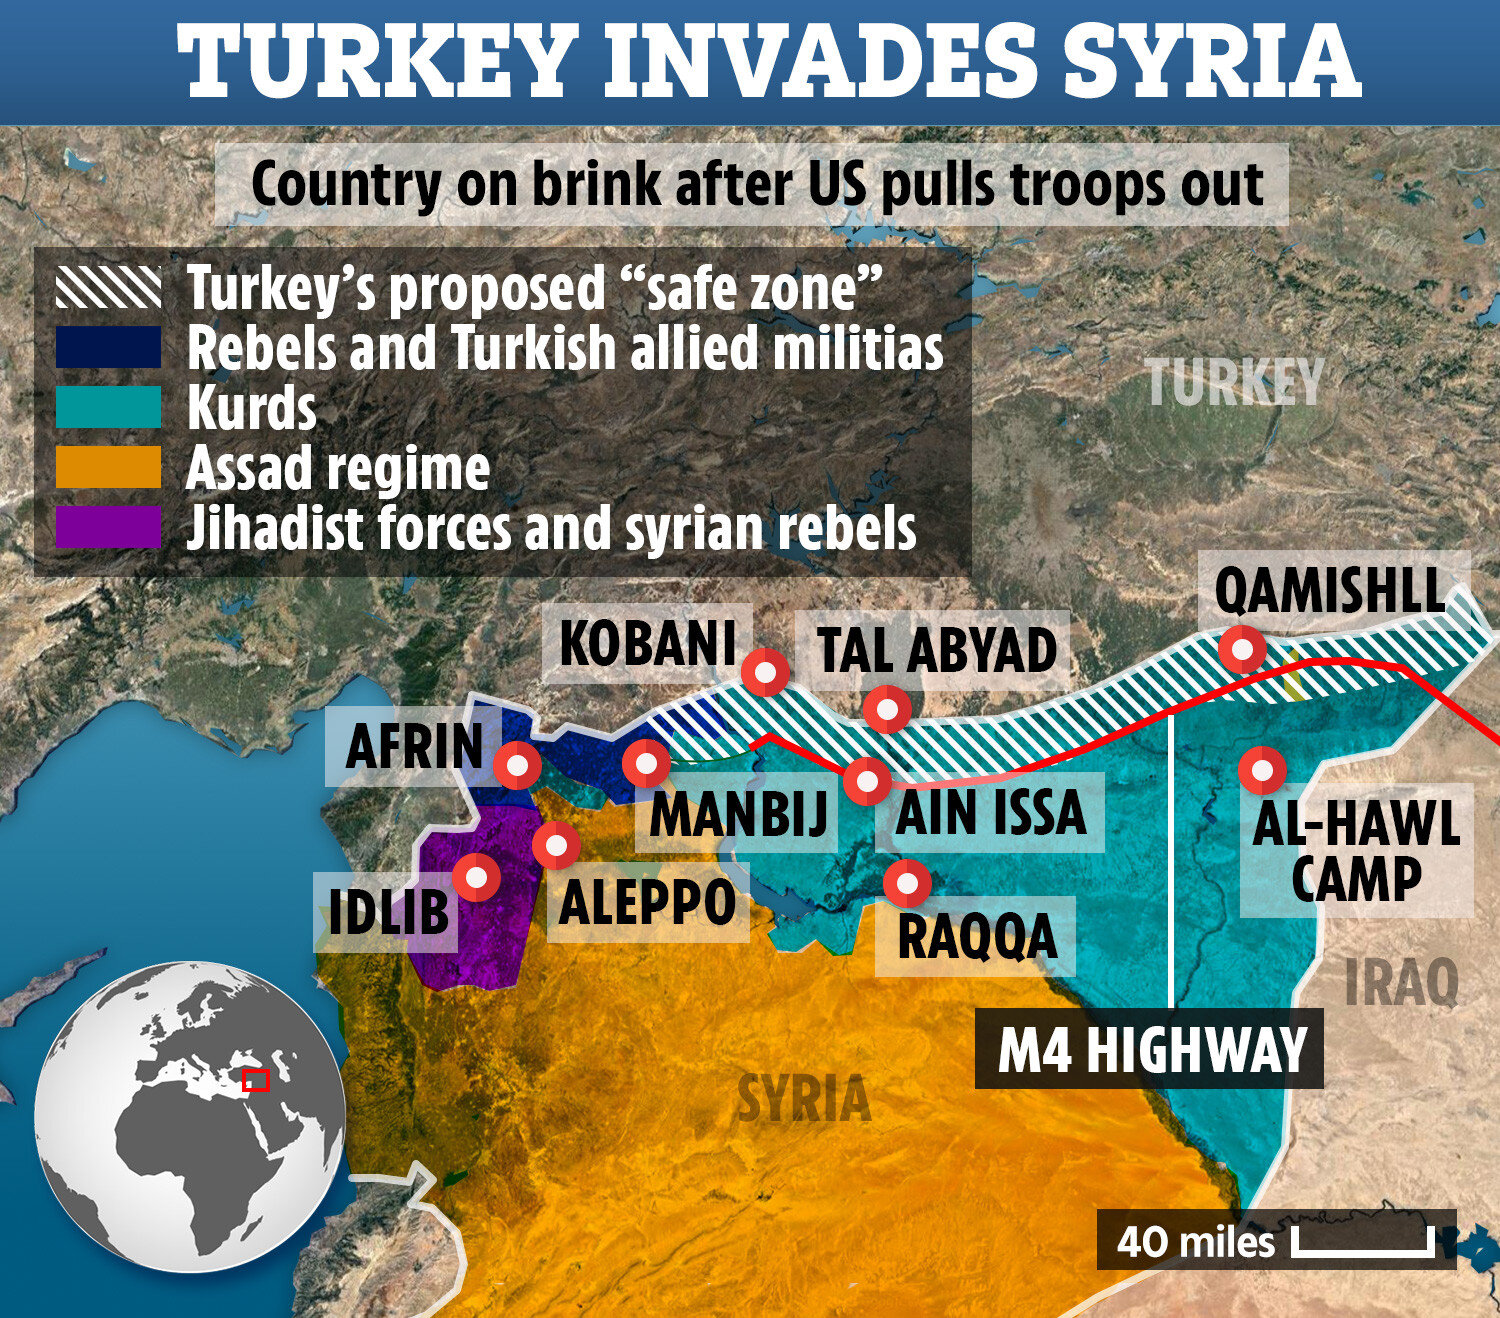 Why do Americans suddenly care about Turkey's presence in Syria? -  Reconsider Media